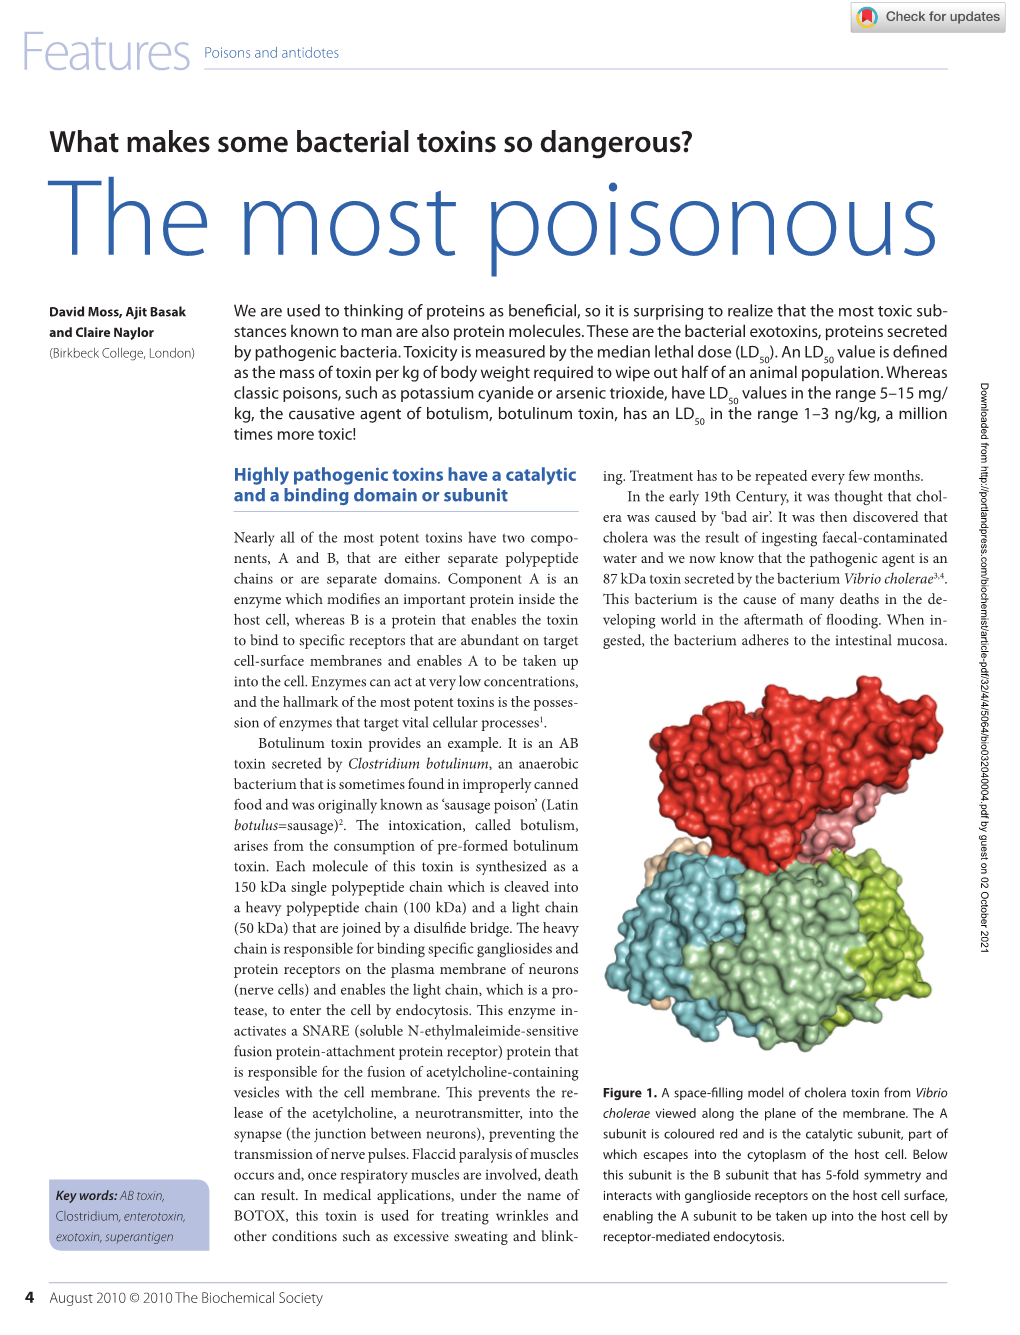 What Makes Some Bacterial Toxins So Dangerous? the Most Poisonous Substances Known